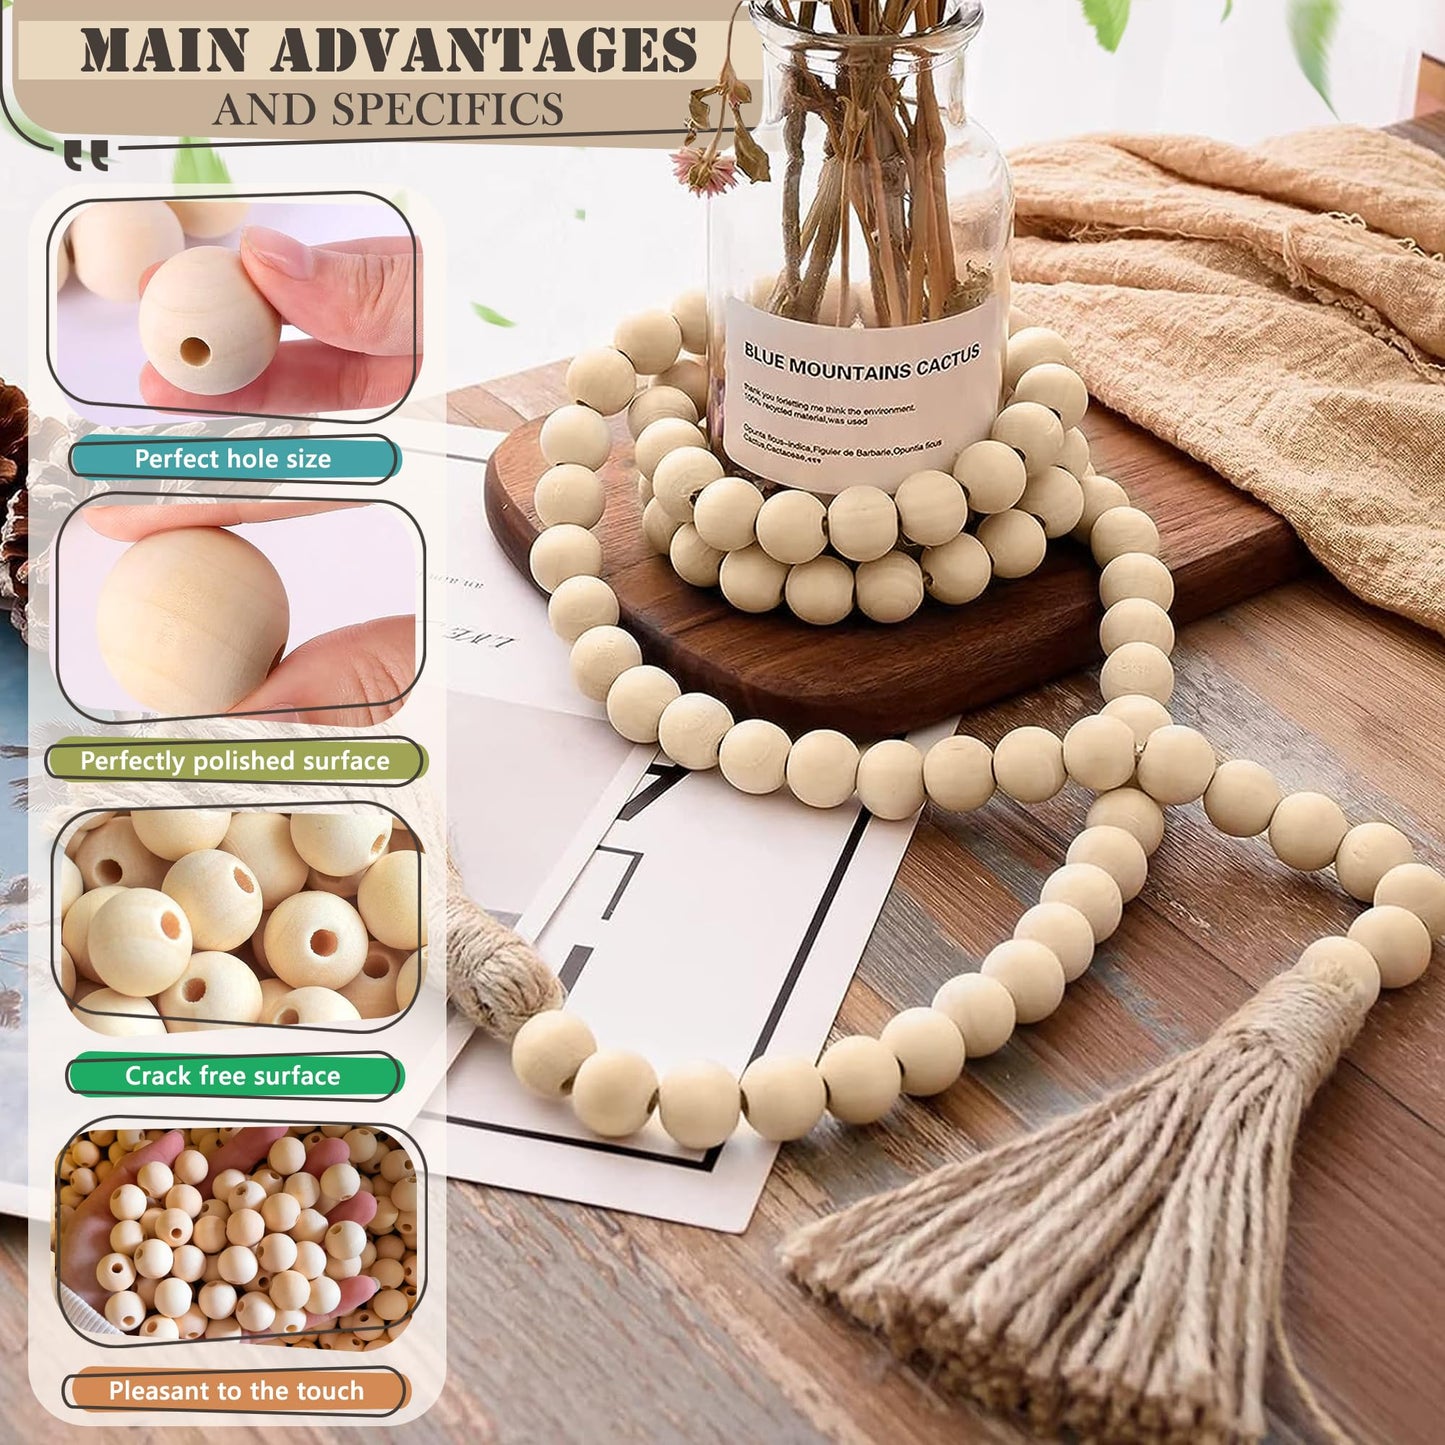 1070 Pcs Wooden Beads with Jute Twine – 7 Size Assortment Pack of Wood Beads – Pure Lotus Wooden Beads for Crafts – Natural Round Beads for Crafts